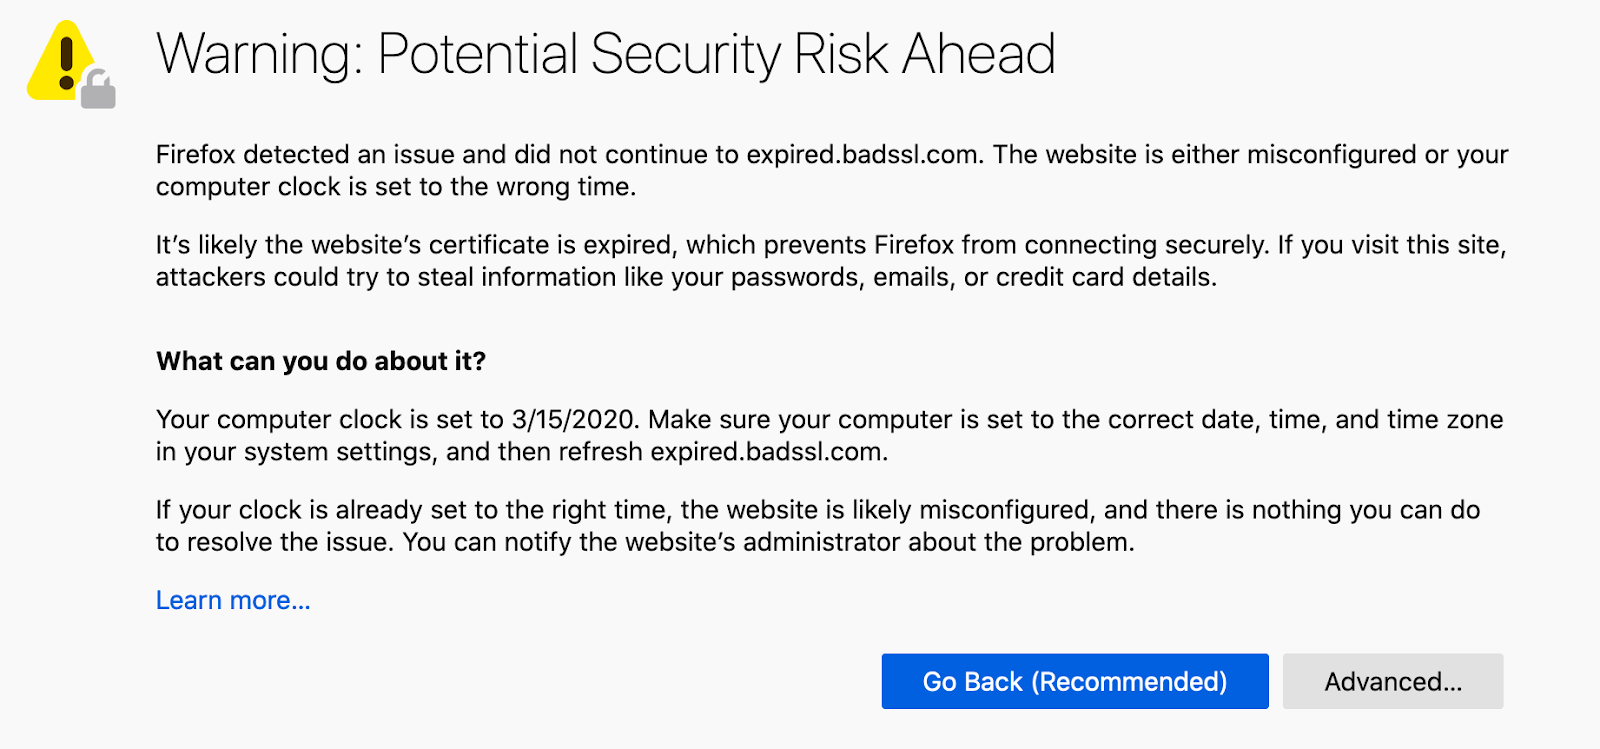 Certification expiration warning in Firefox